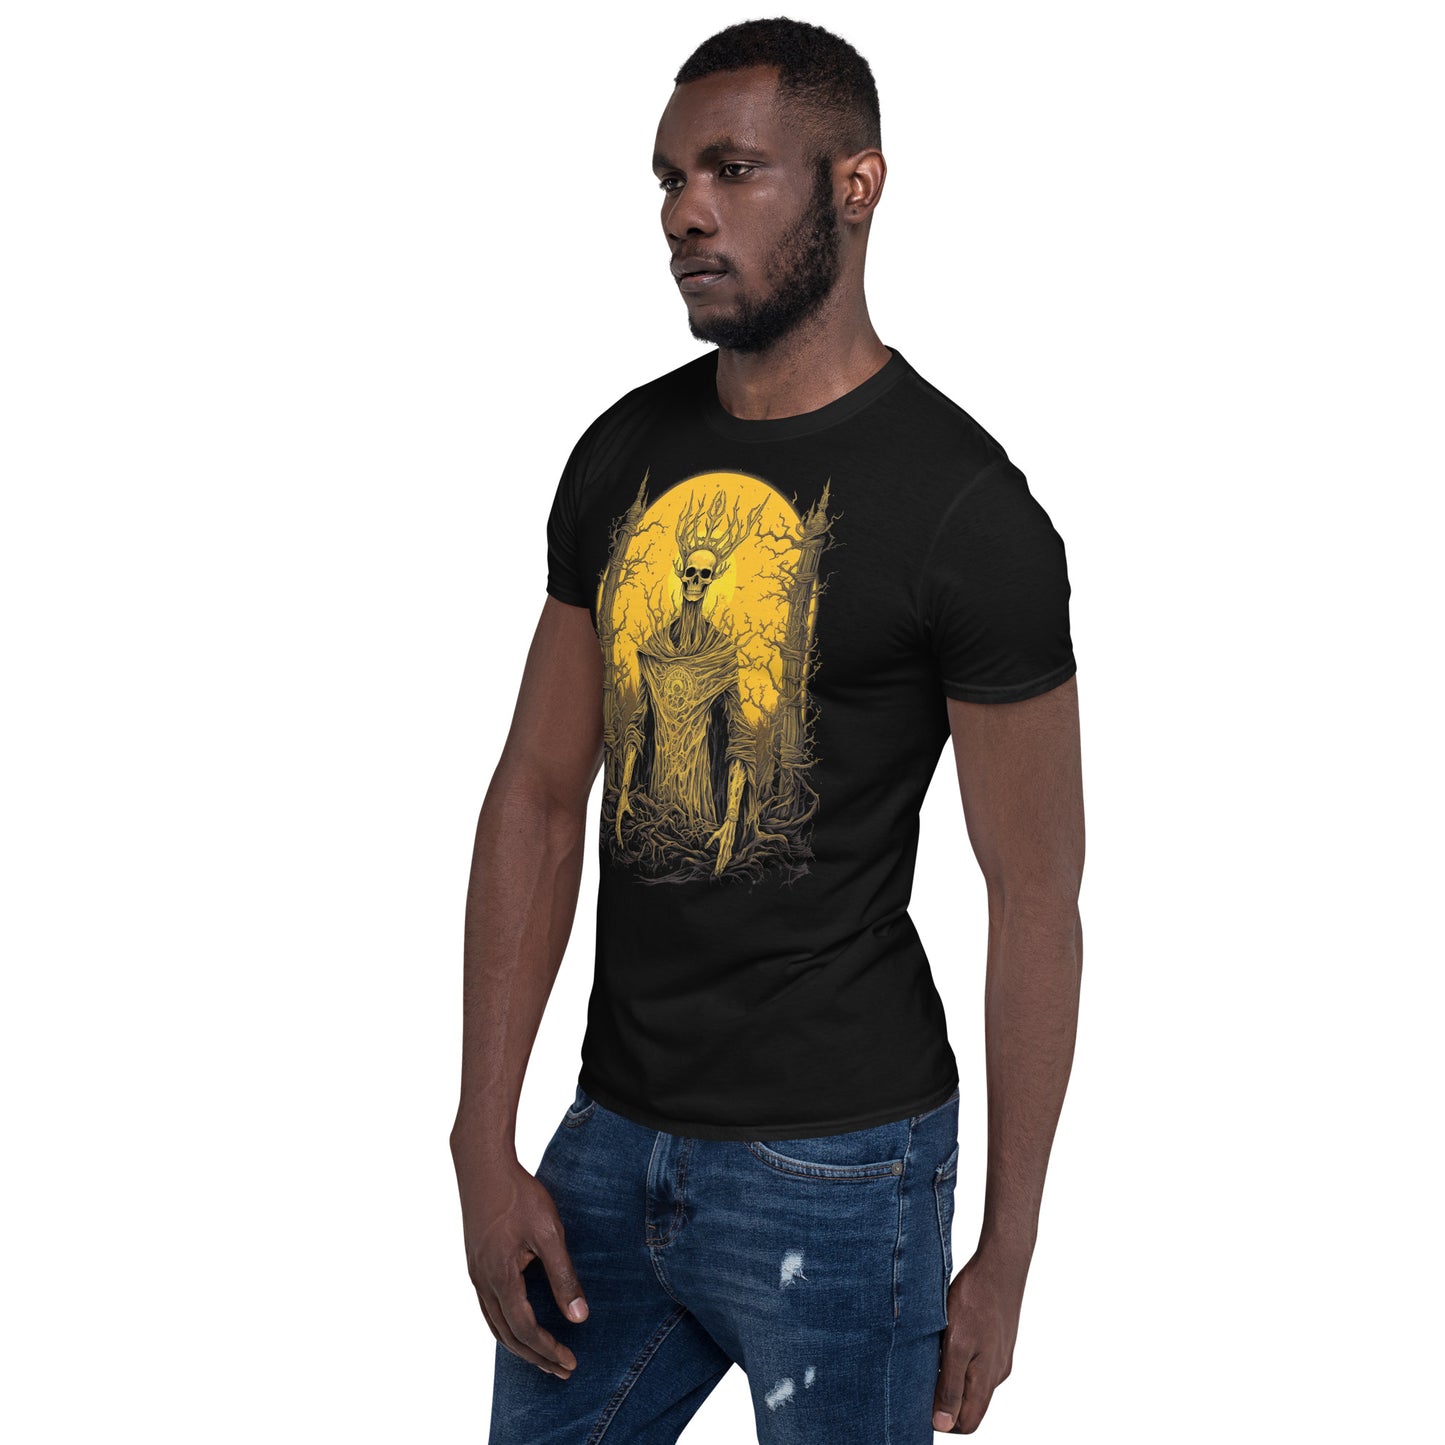 The King In Yellow Skull and Branches T-Shirt